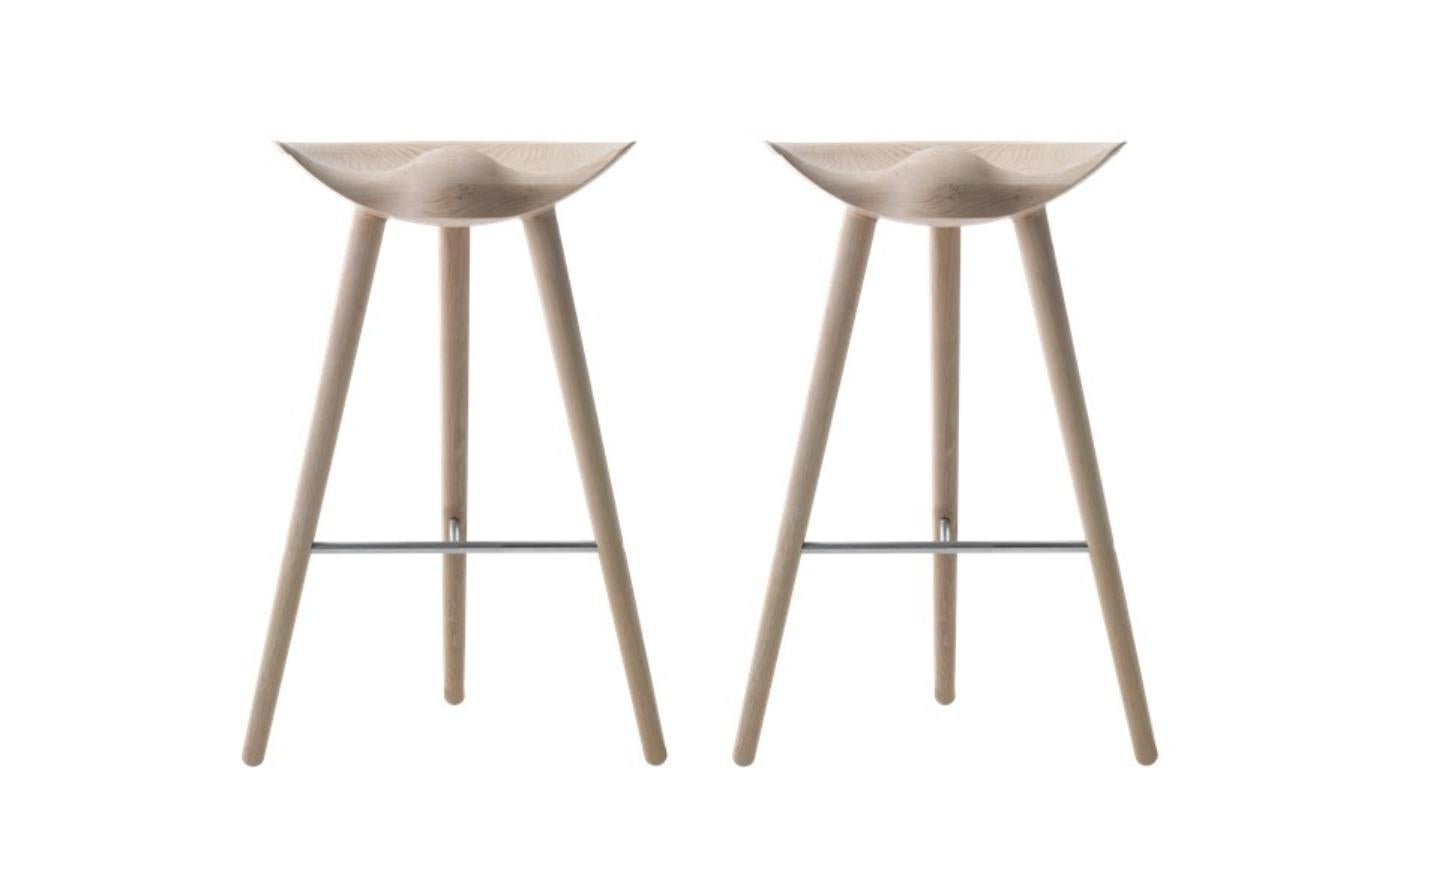 Set of 2 ML 42 Oak and stainless steel bar stools by Lassen.
Dimensions: H 77 x W 36 x L 55.5 cm.
Materials: Oak, stainless steel.

In 1942 Mogens Lassen designed the Stool ML42 as a piece for a furniture exhibition held at the Danish Museum of